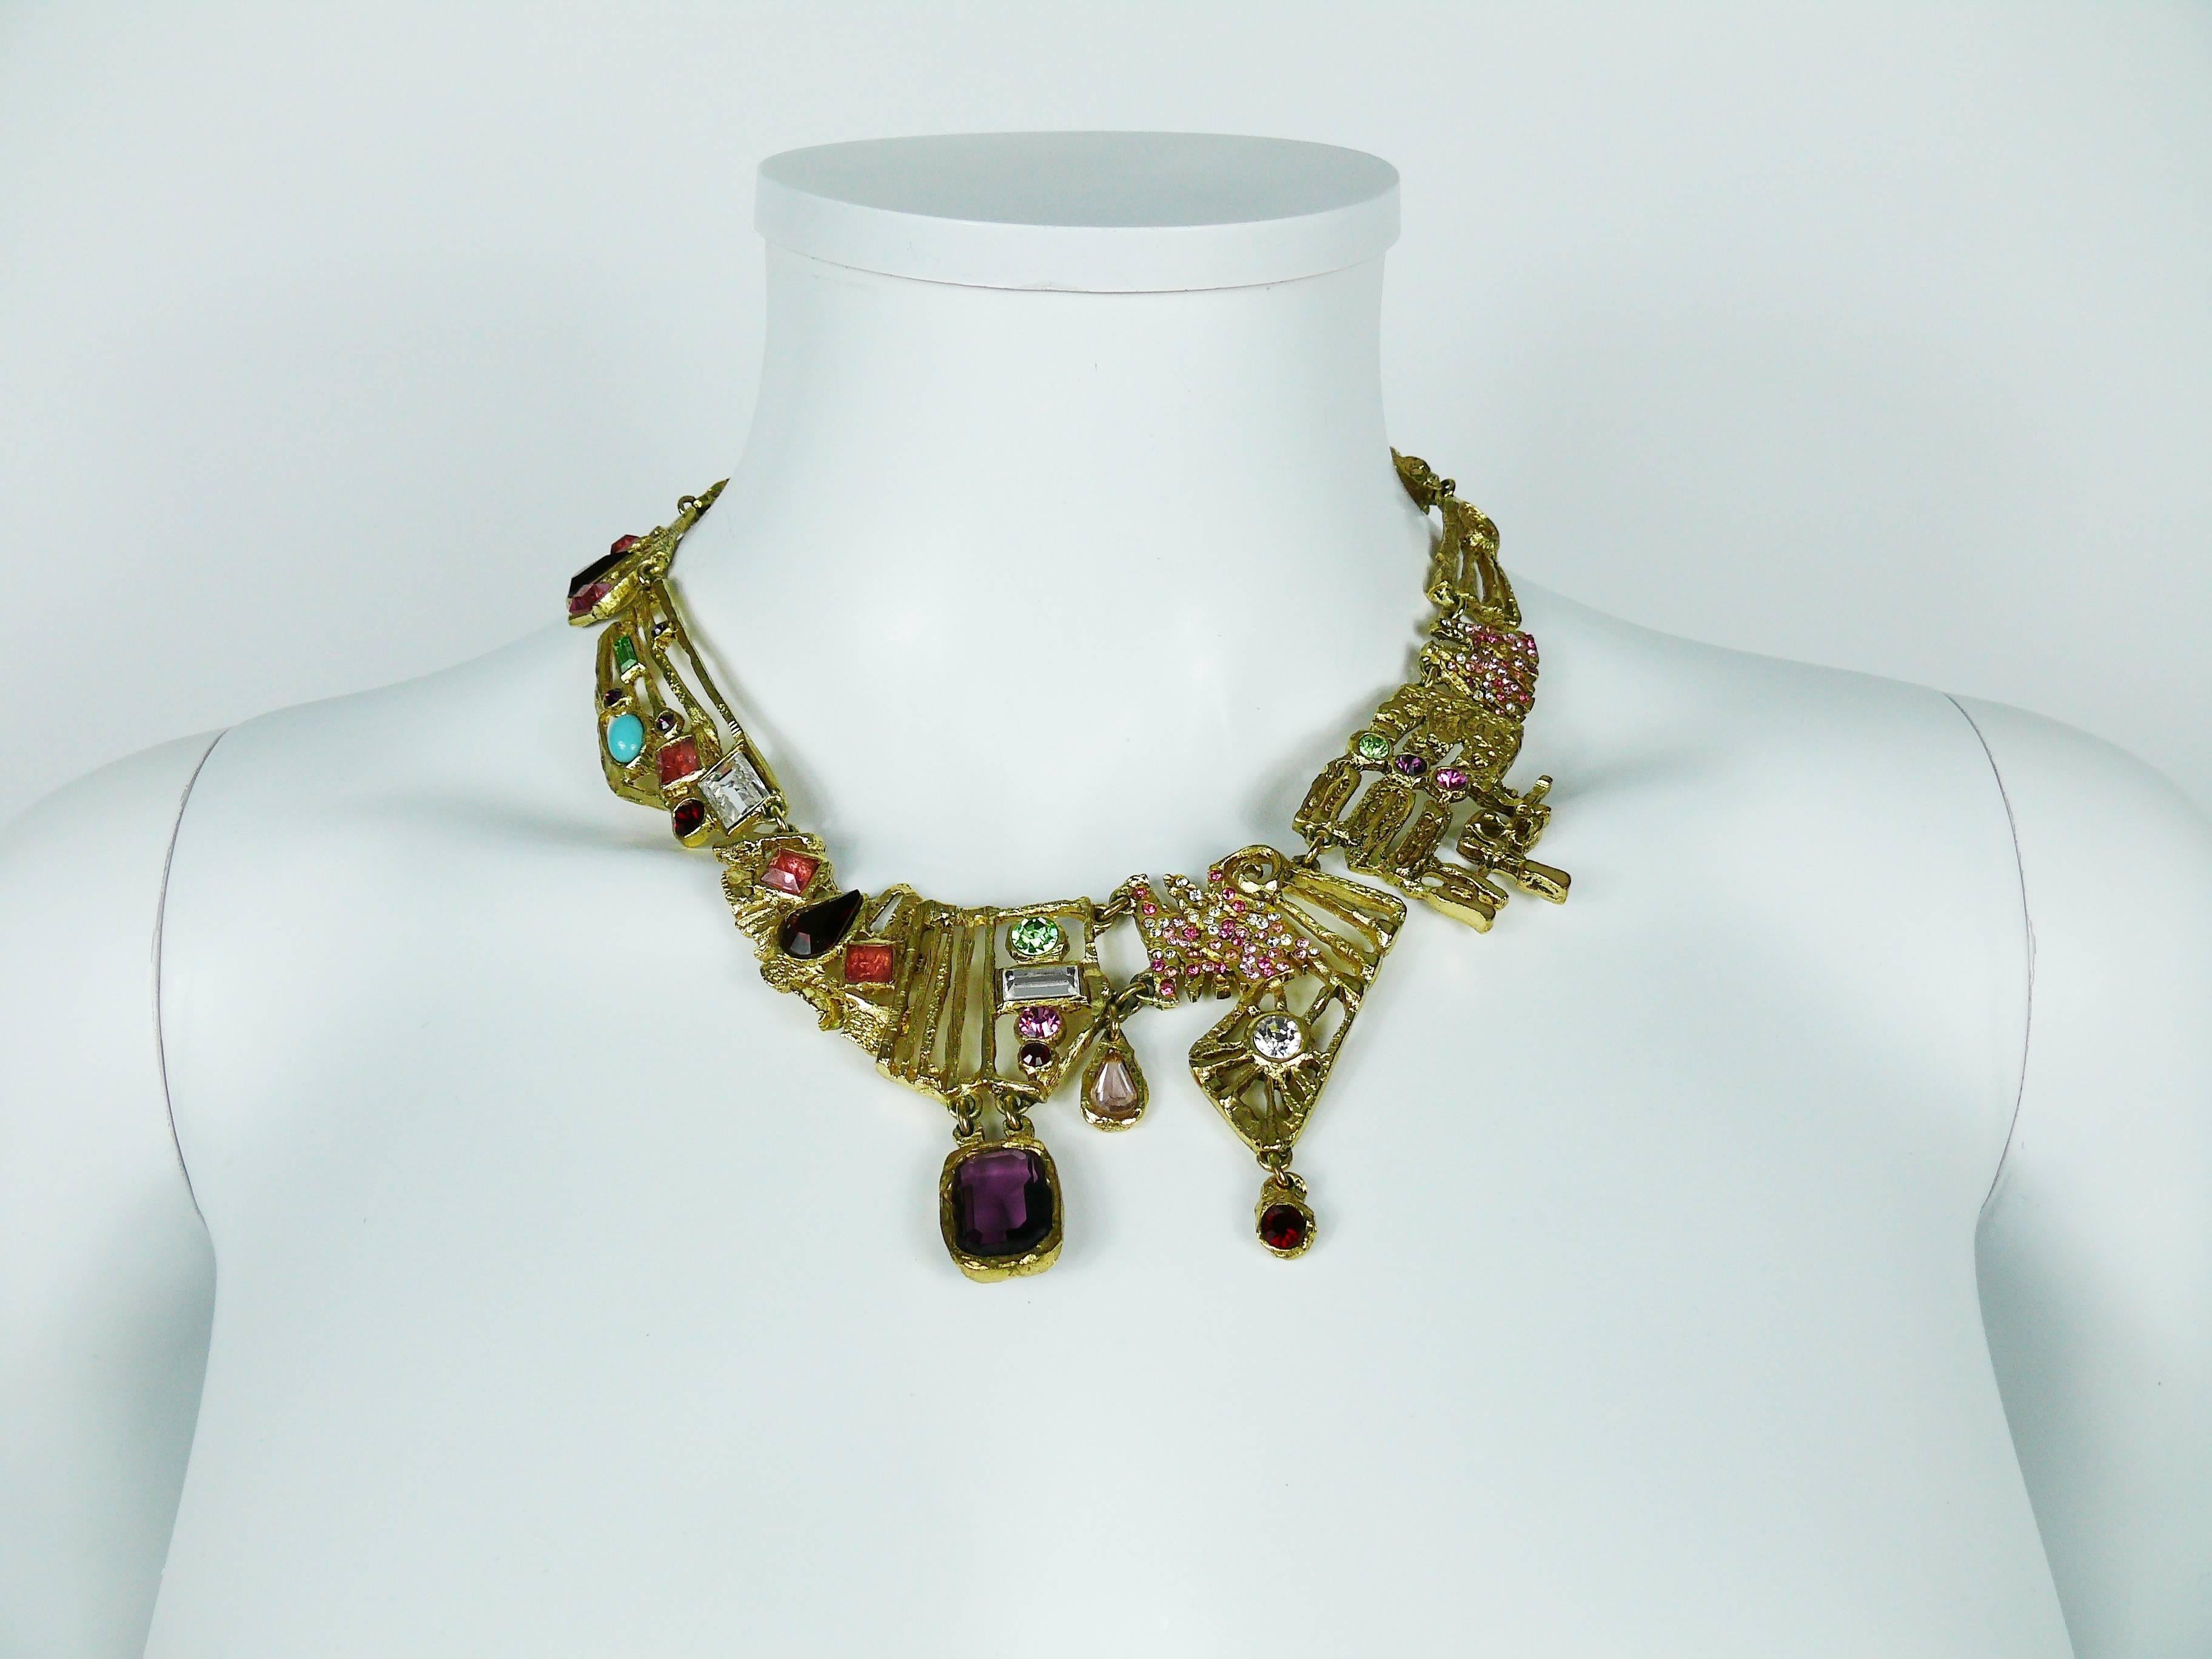 CHRISTIAN LACROIX vintage bejeweled gold toned brutalist necklace featuring multicolored glass cabochon and crystal embellishement.

Hook clasp.
Extension chain.

Marked CHRISTIAN LACROIX CL Made in France.

Indicative measurements : total